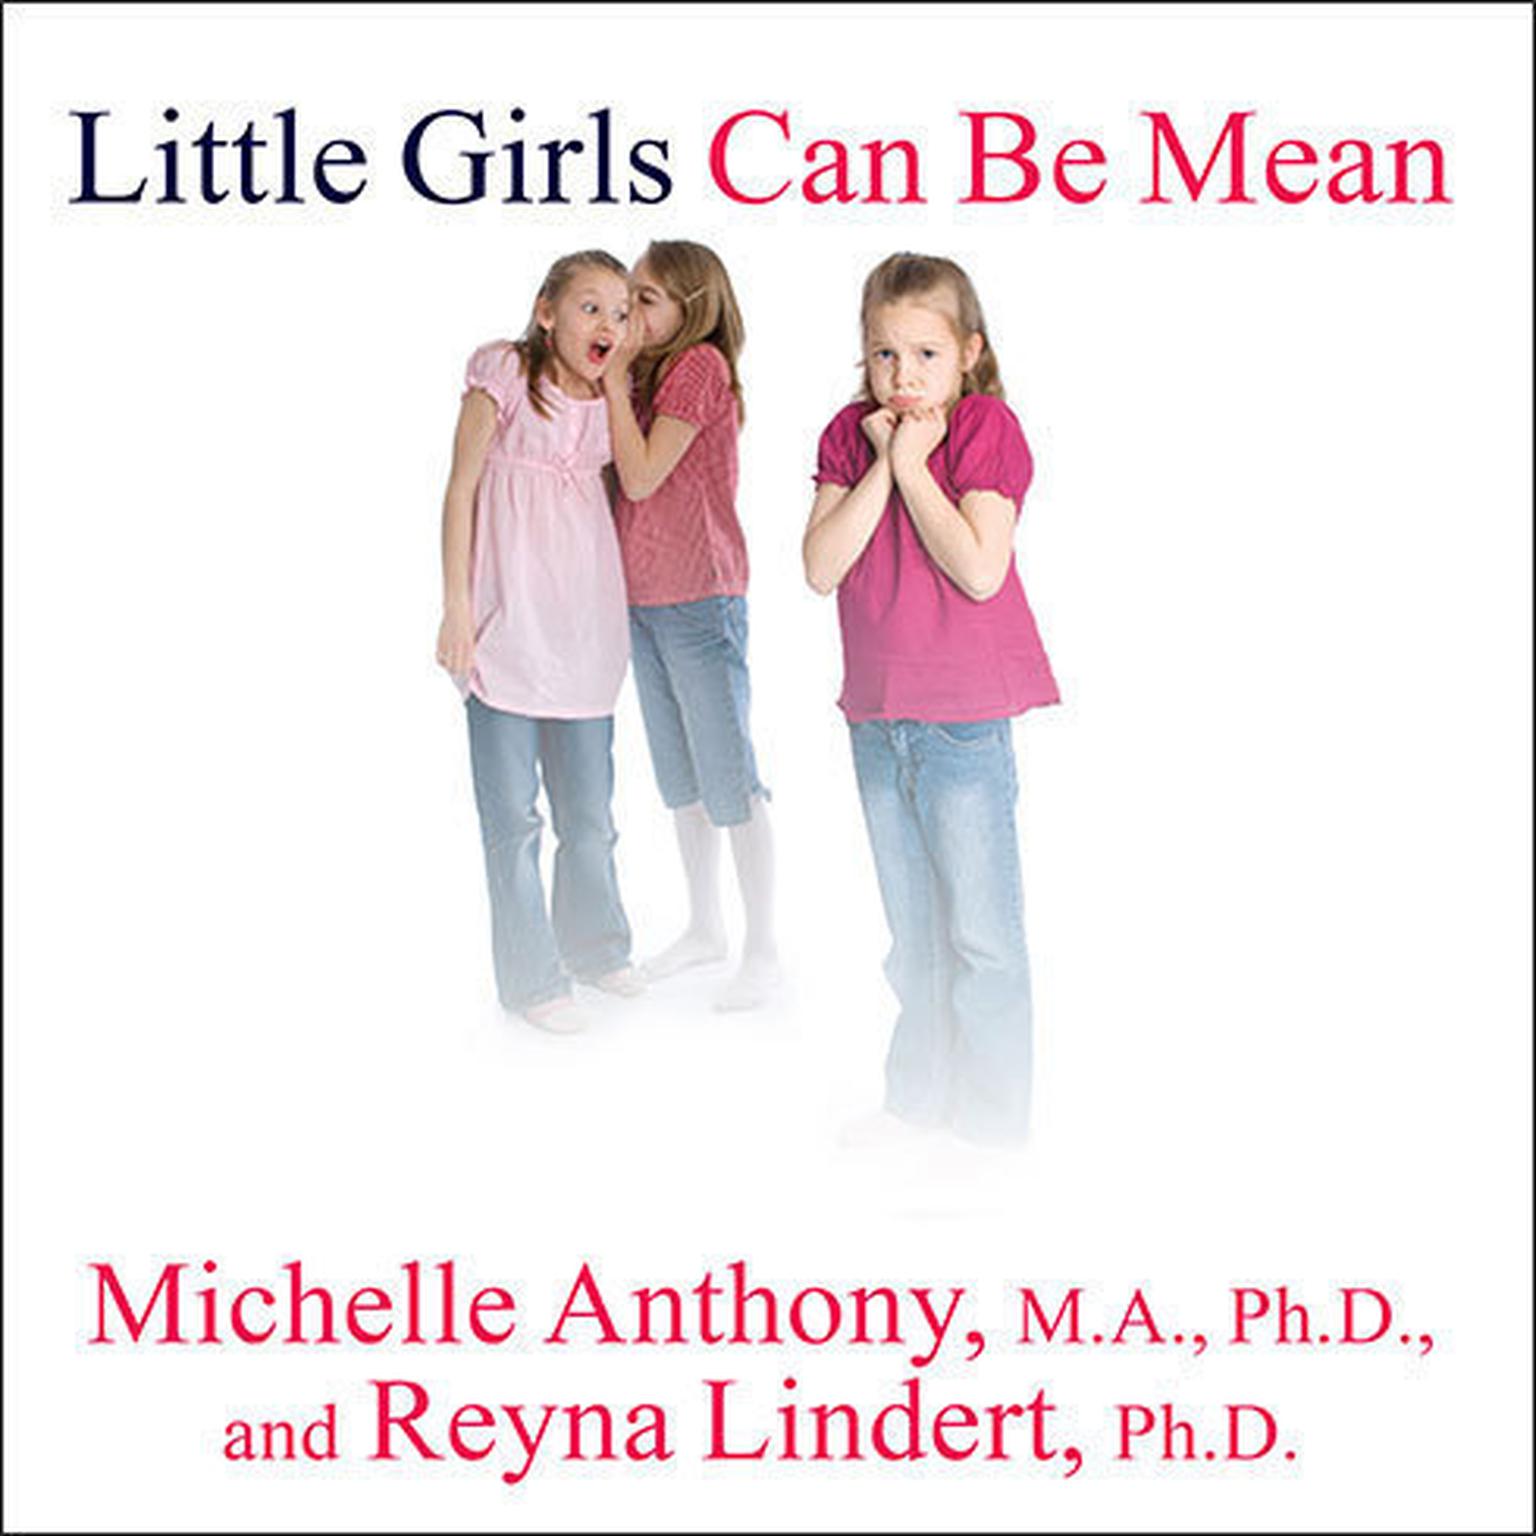 Little Girls Can Be Mean: Four Steps to Bully-Proof Girls in the Early Grades Audiobook, by Michelle Anthony